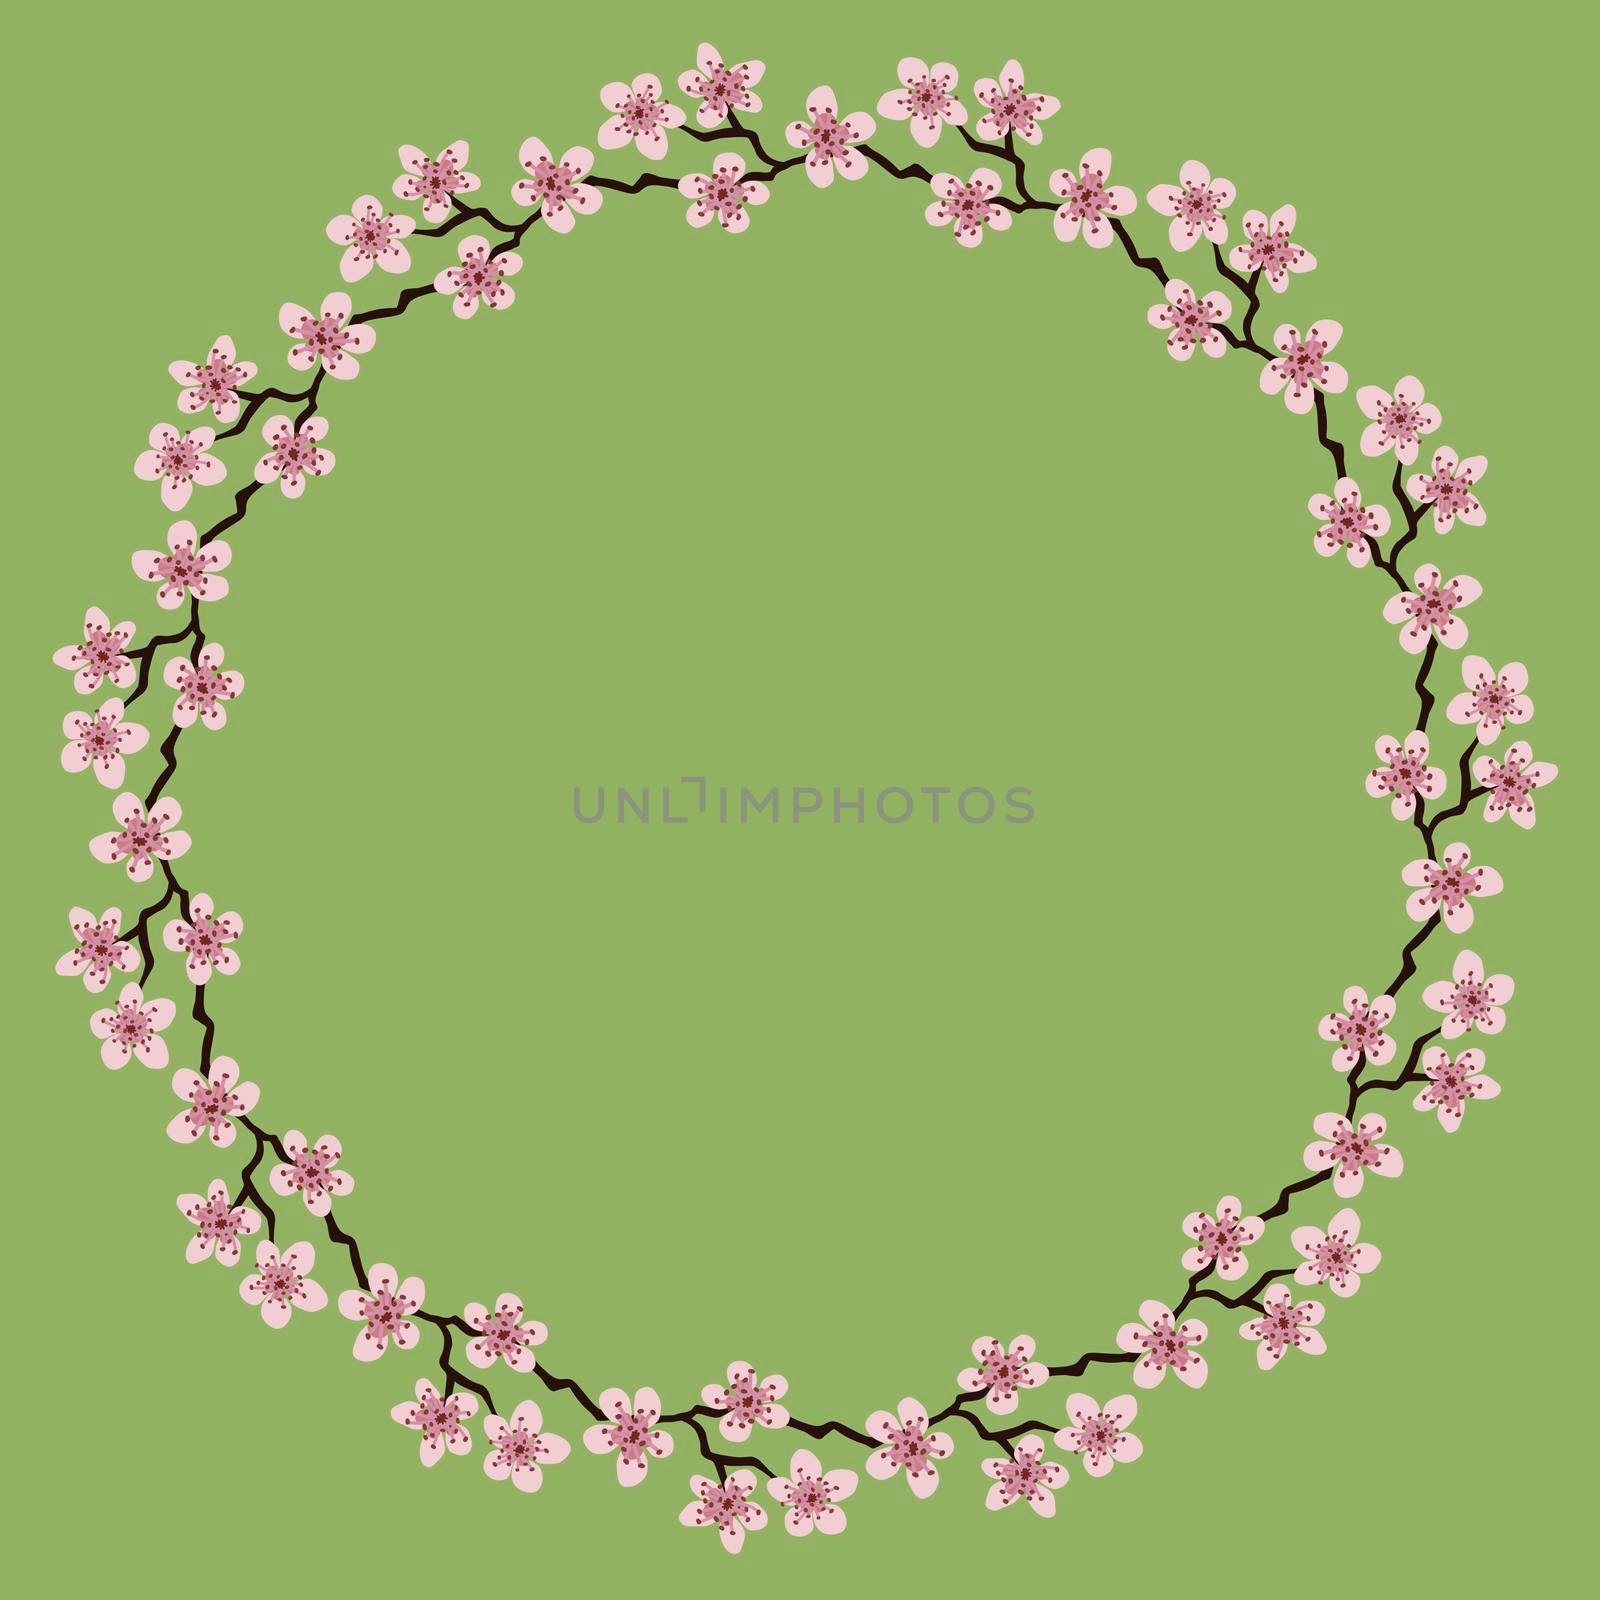 Colorful flowers wreath.Delicate wreath of sakura branches.Flowers blossom hand drawn,circle frame of pink colors flowers on olive.Copyspace.Design for invitation, wedding invitation or greeting cards by Angelsmoon